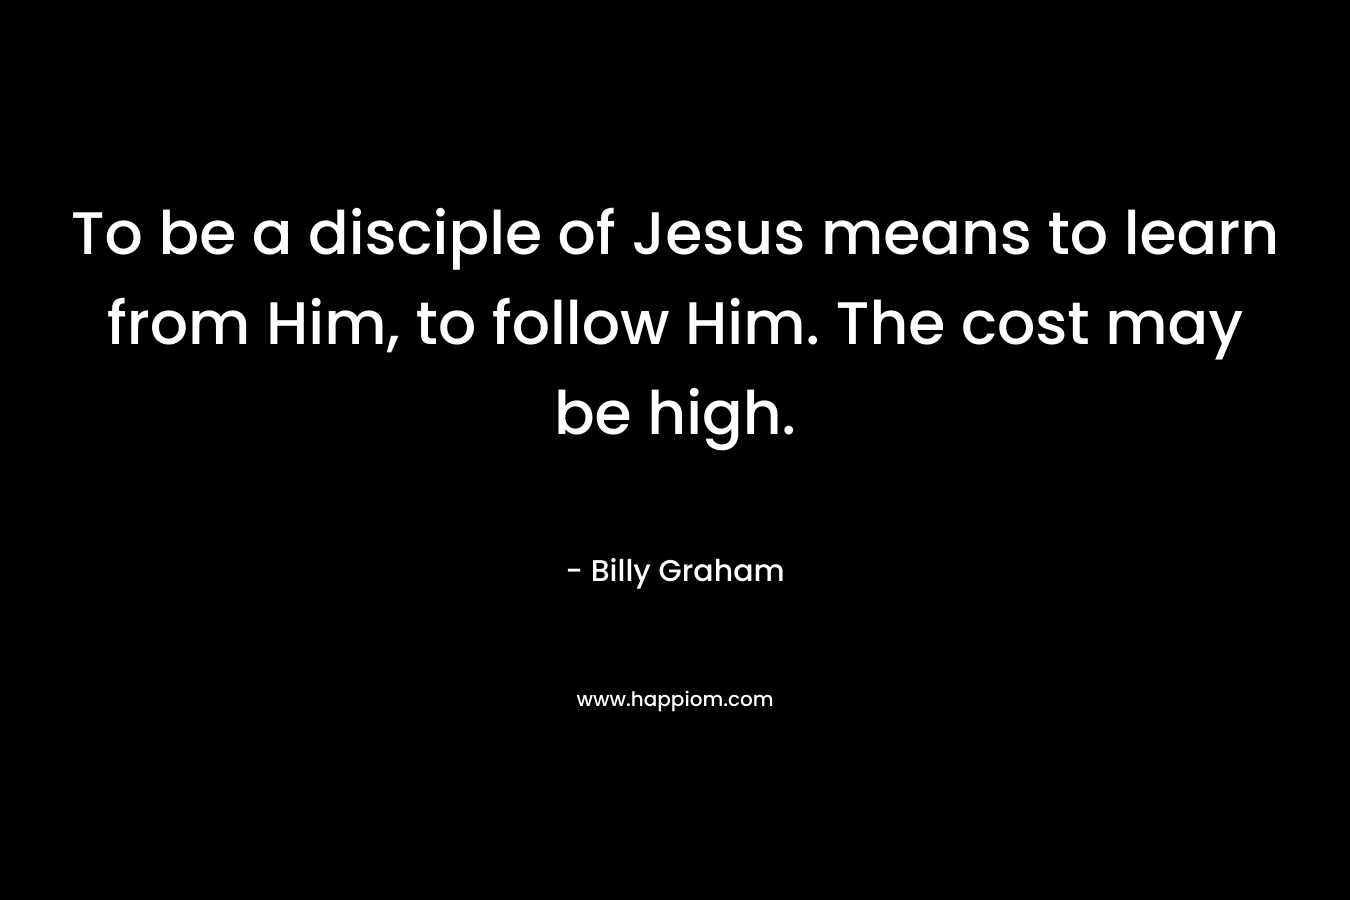 To be a disciple of Jesus means to learn from Him, to follow Him. The cost may be high. – Billy Graham